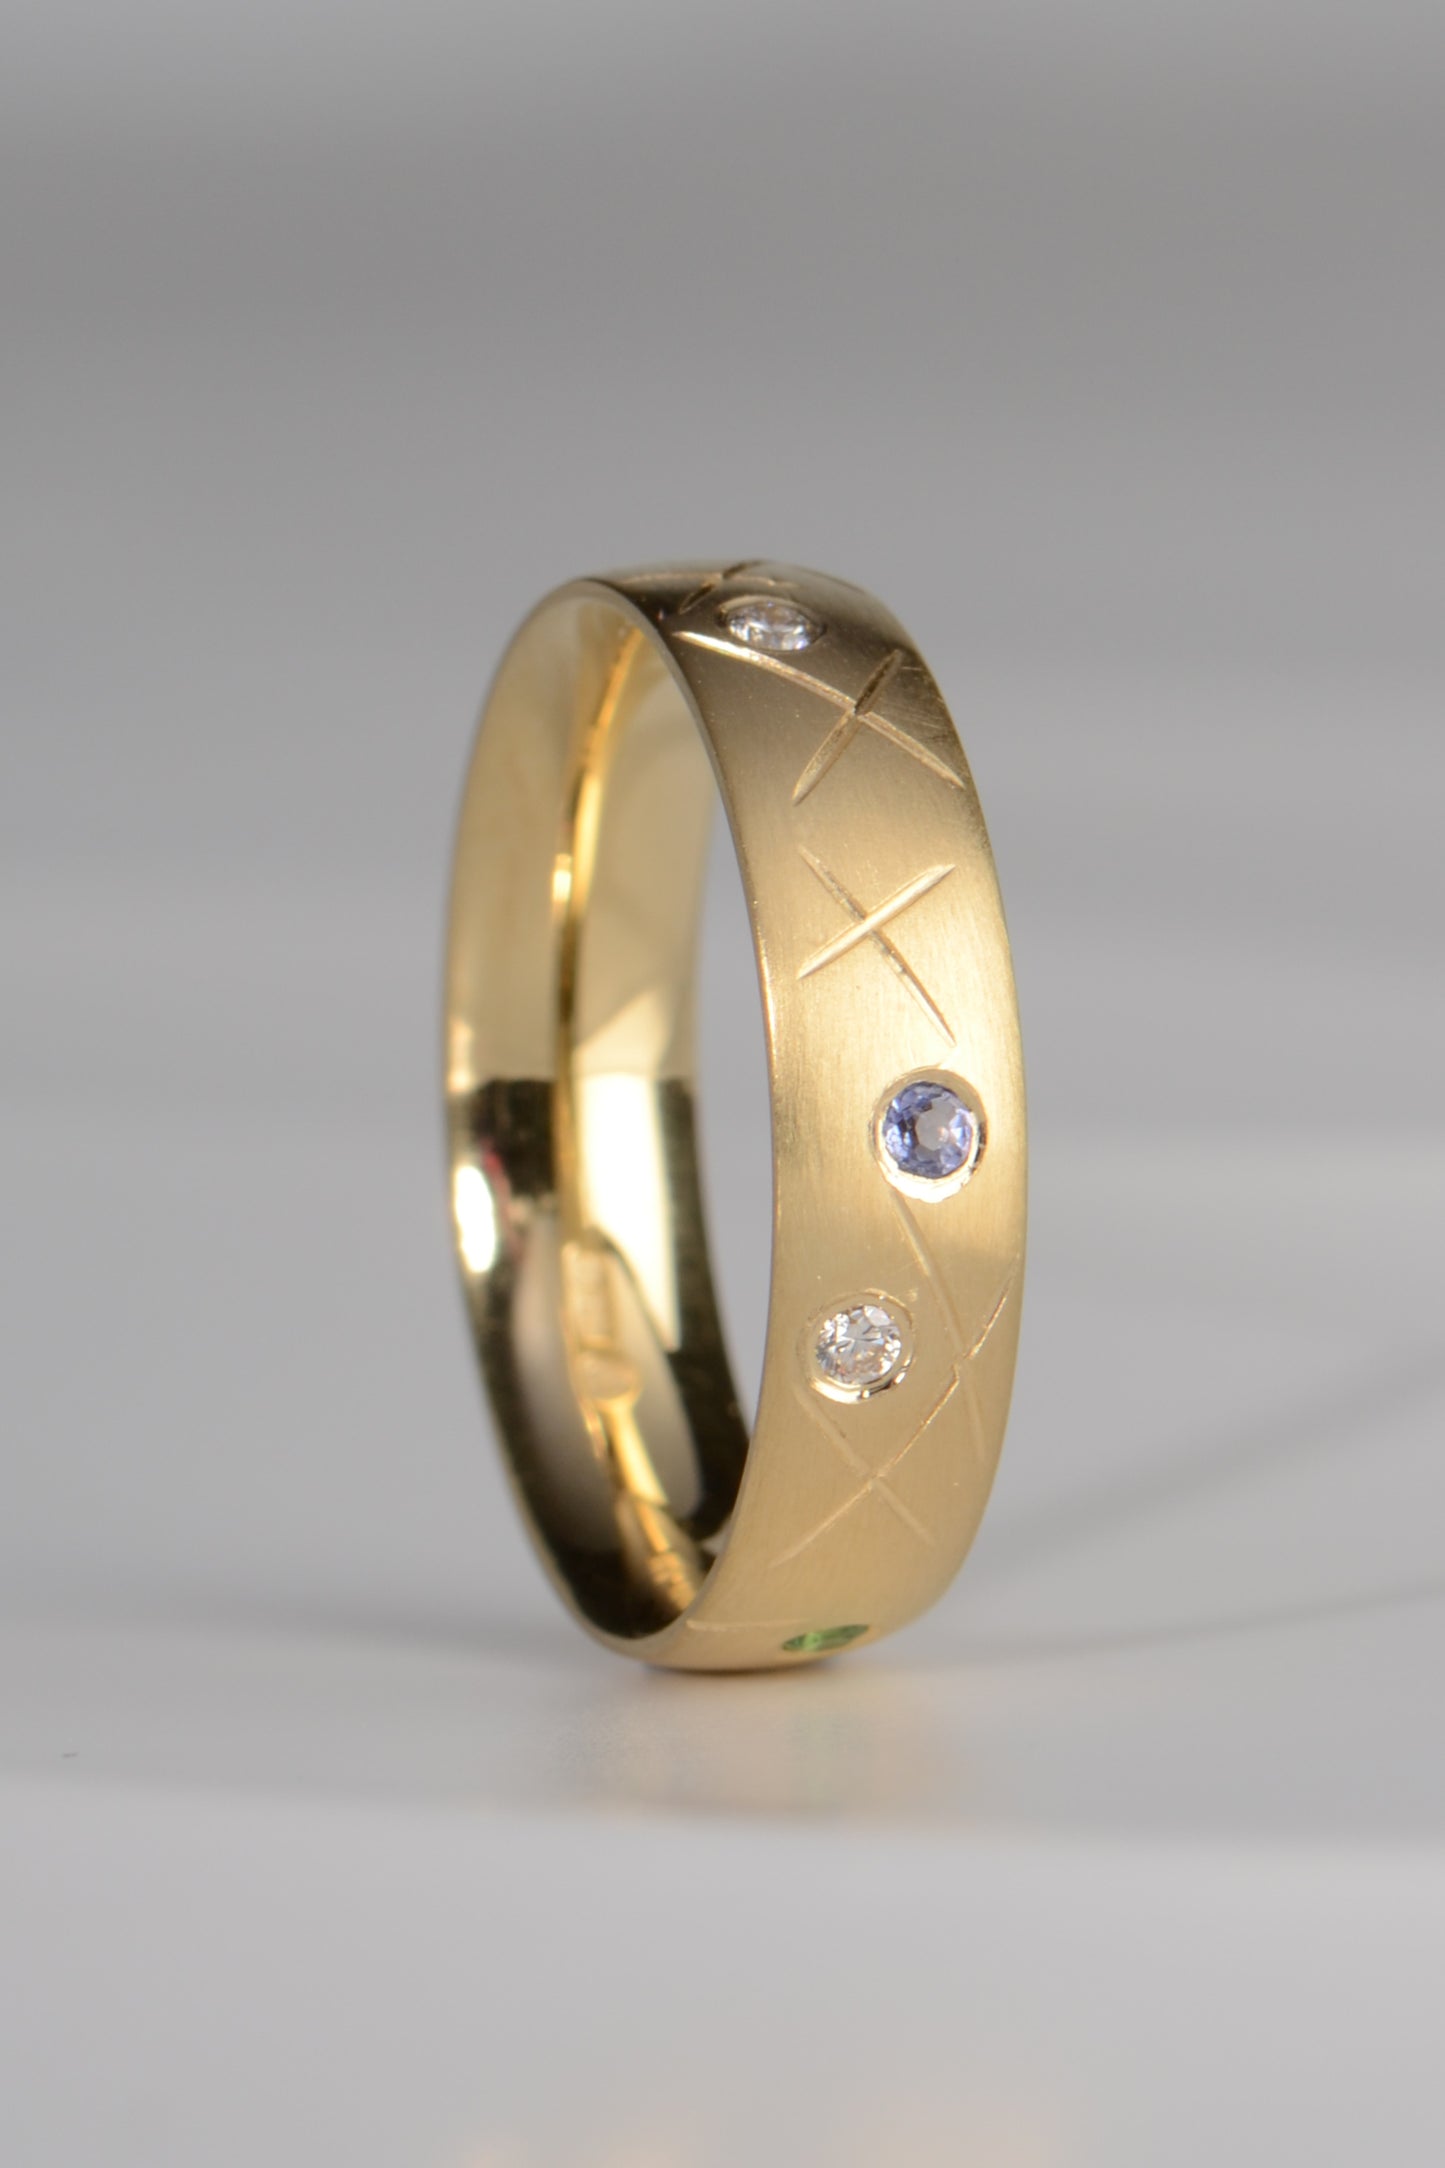 Afternoon Tea hundreds and thousands 18ct gold ring